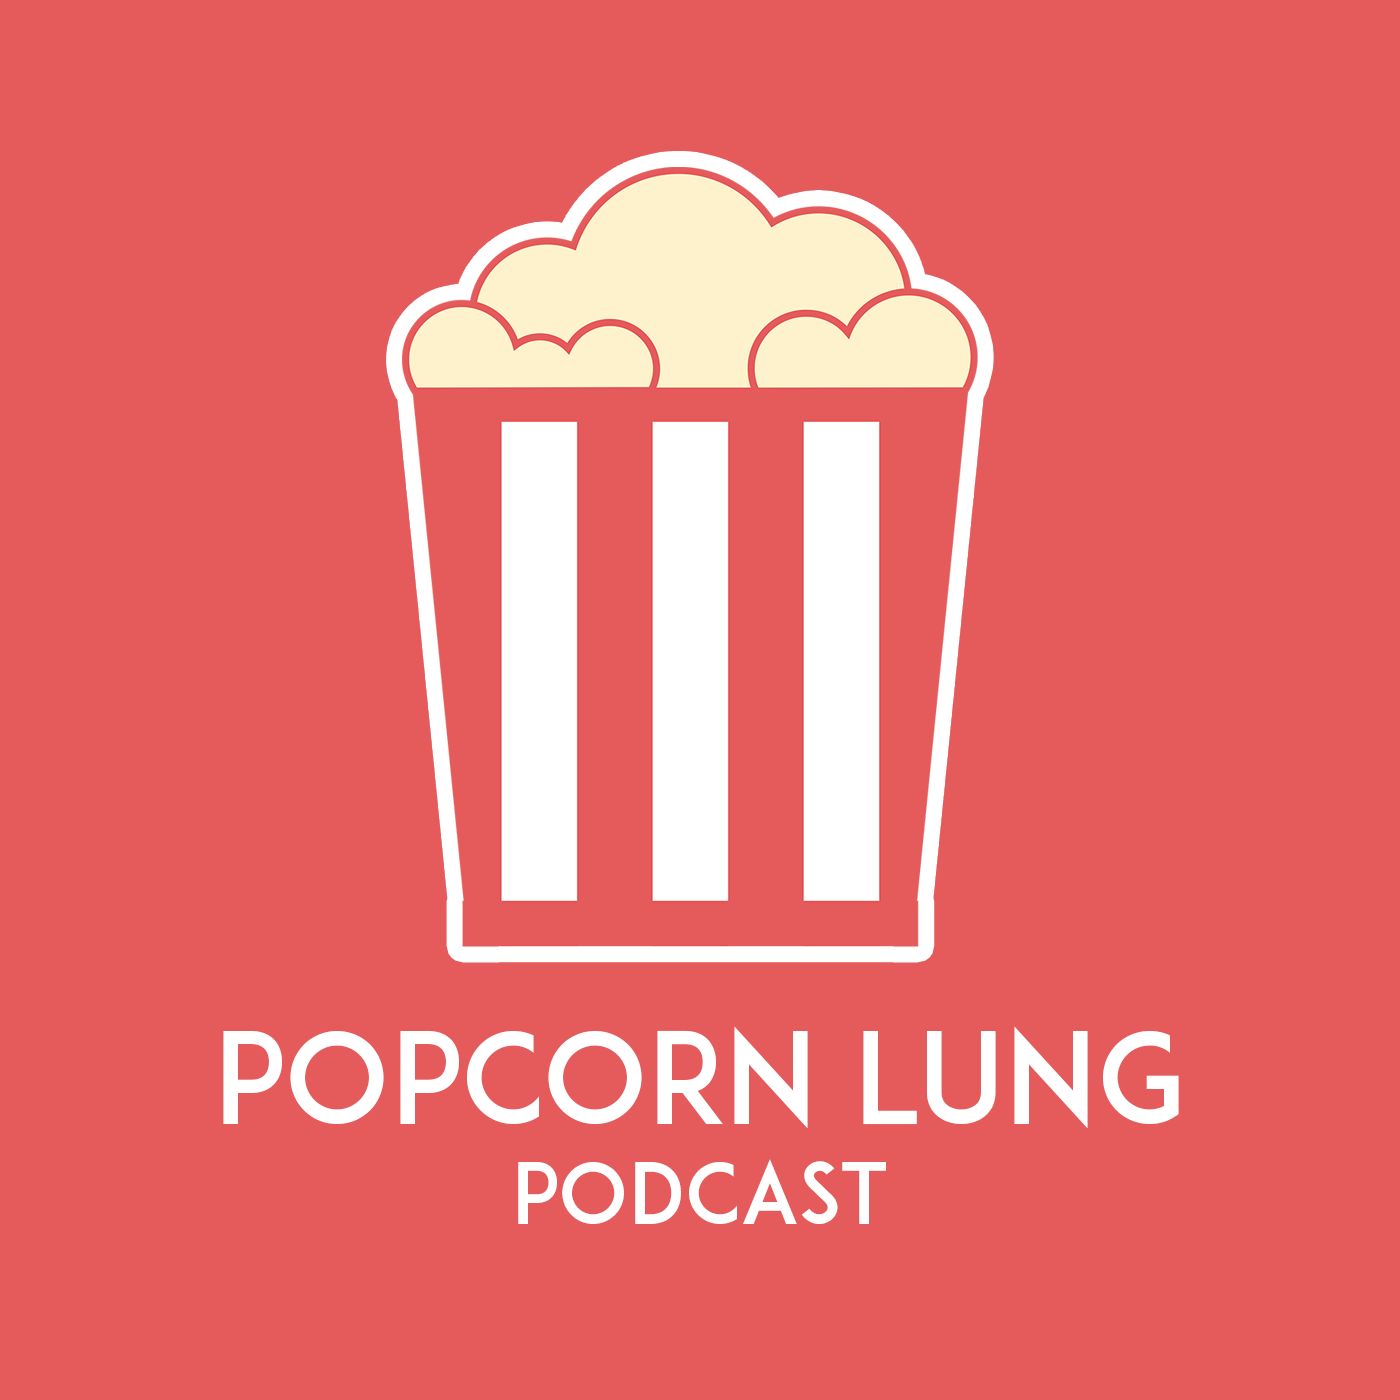 Popcorn Lung Podcast